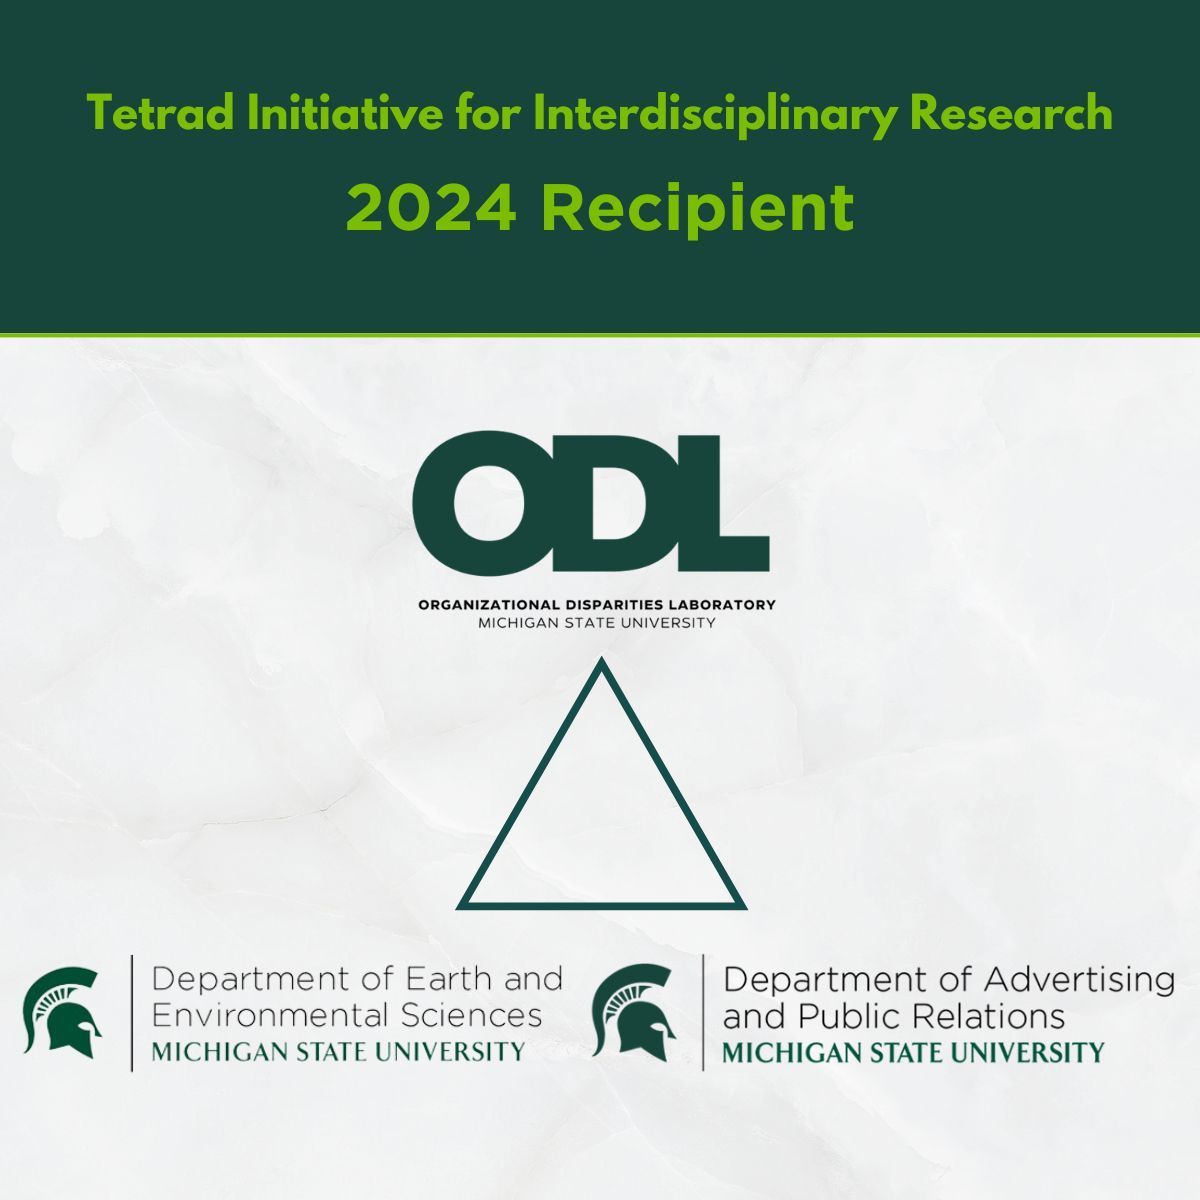 The Organizational Disparities Lab is excited to be part of the inaugural @michiganstateu TETRAD interdisciplinary research program with our collaborators. More: research.msu.edu/news/tetrad-aw…